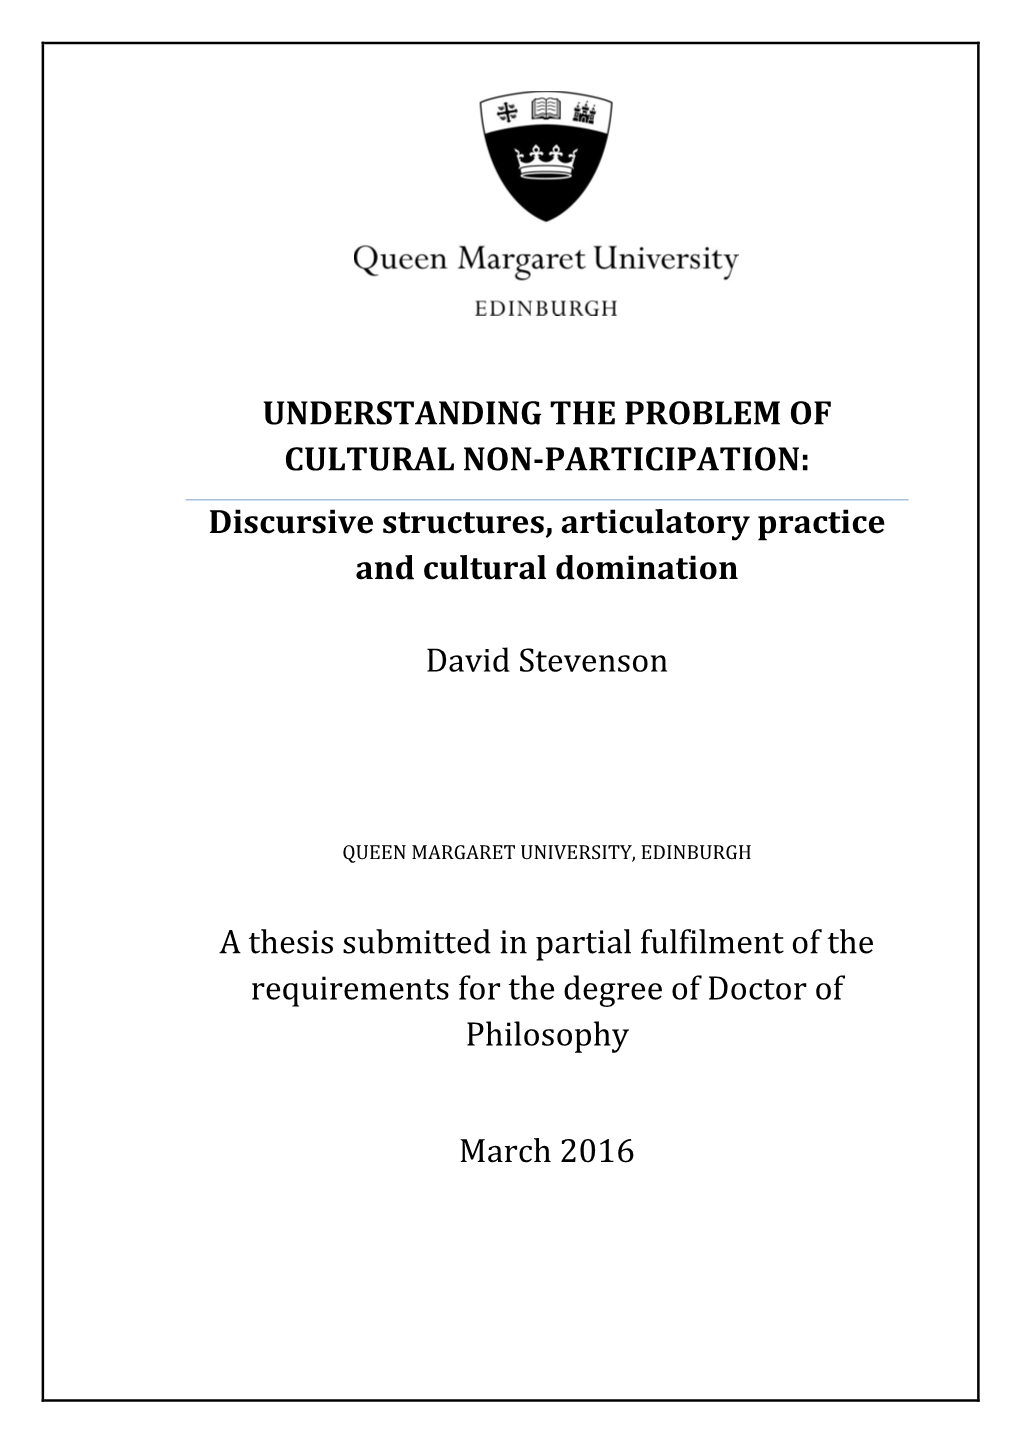 UNDERSTANDING the PROBLEM of CULTURAL NON-PARTICIPATION: Discursive Structures, Articulatory Practice and Cultural Domination